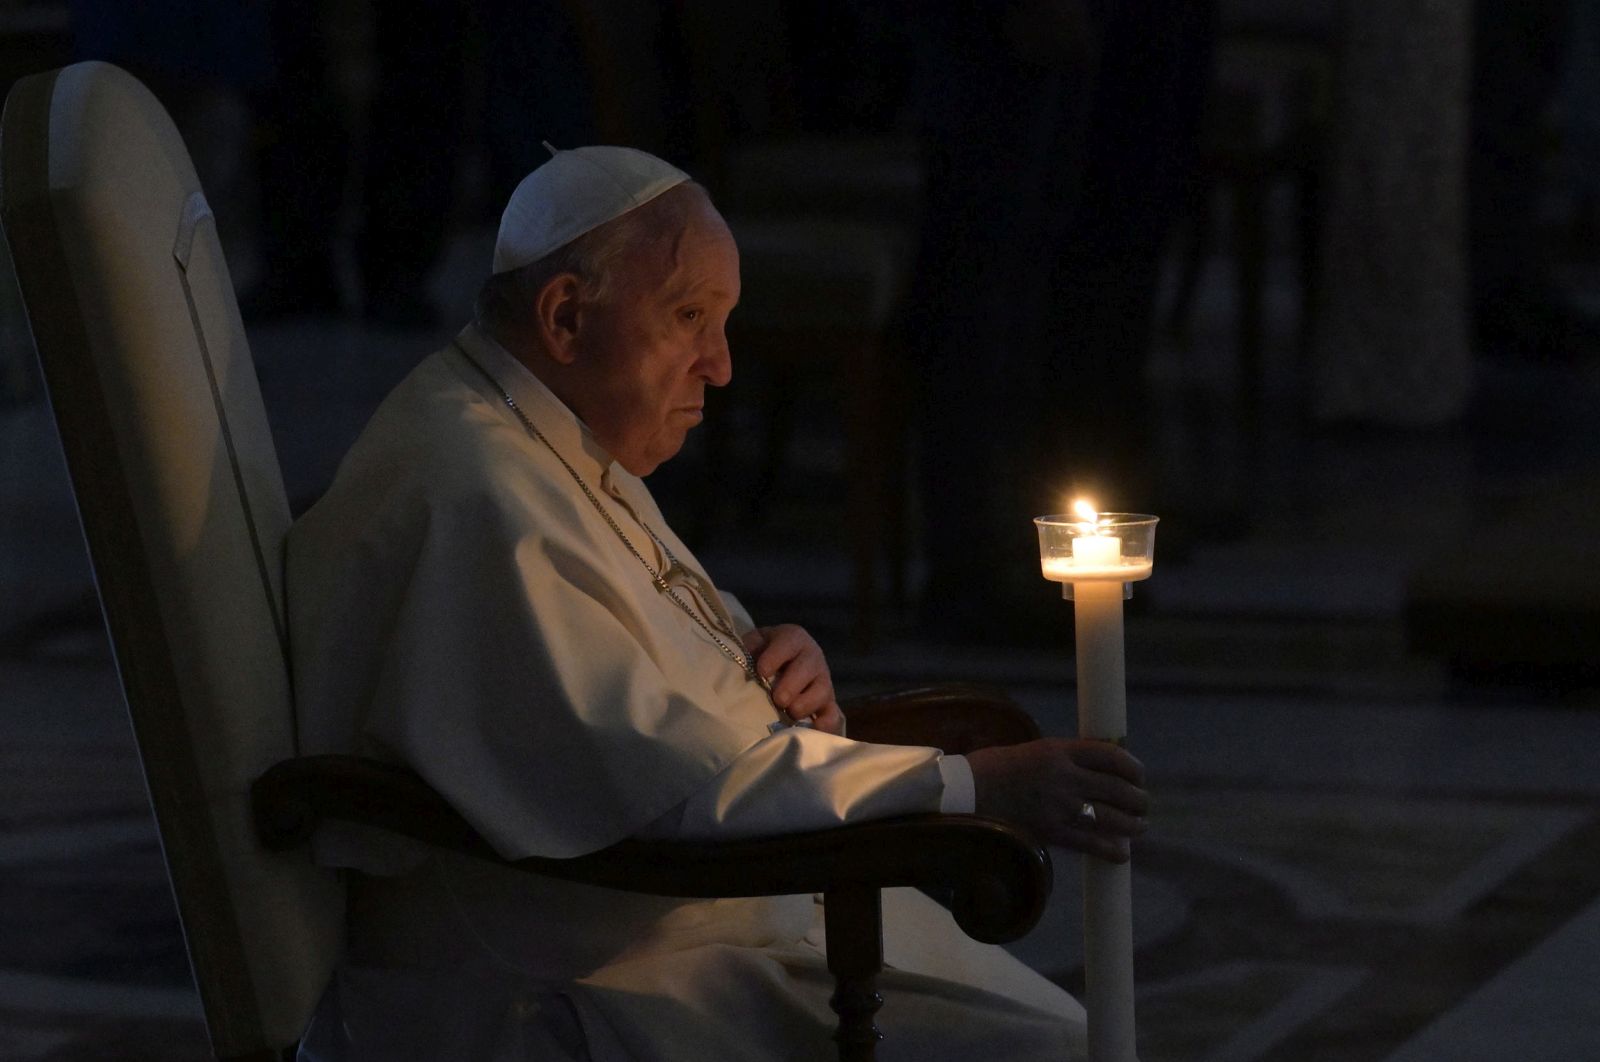 epa09893645 Pope Francis holds a candle as he attends the Easter Vigil Mass in Saint Peter's Basilica at the Vatican, 16 April 2022.  EPA/CLAUDIO PERI